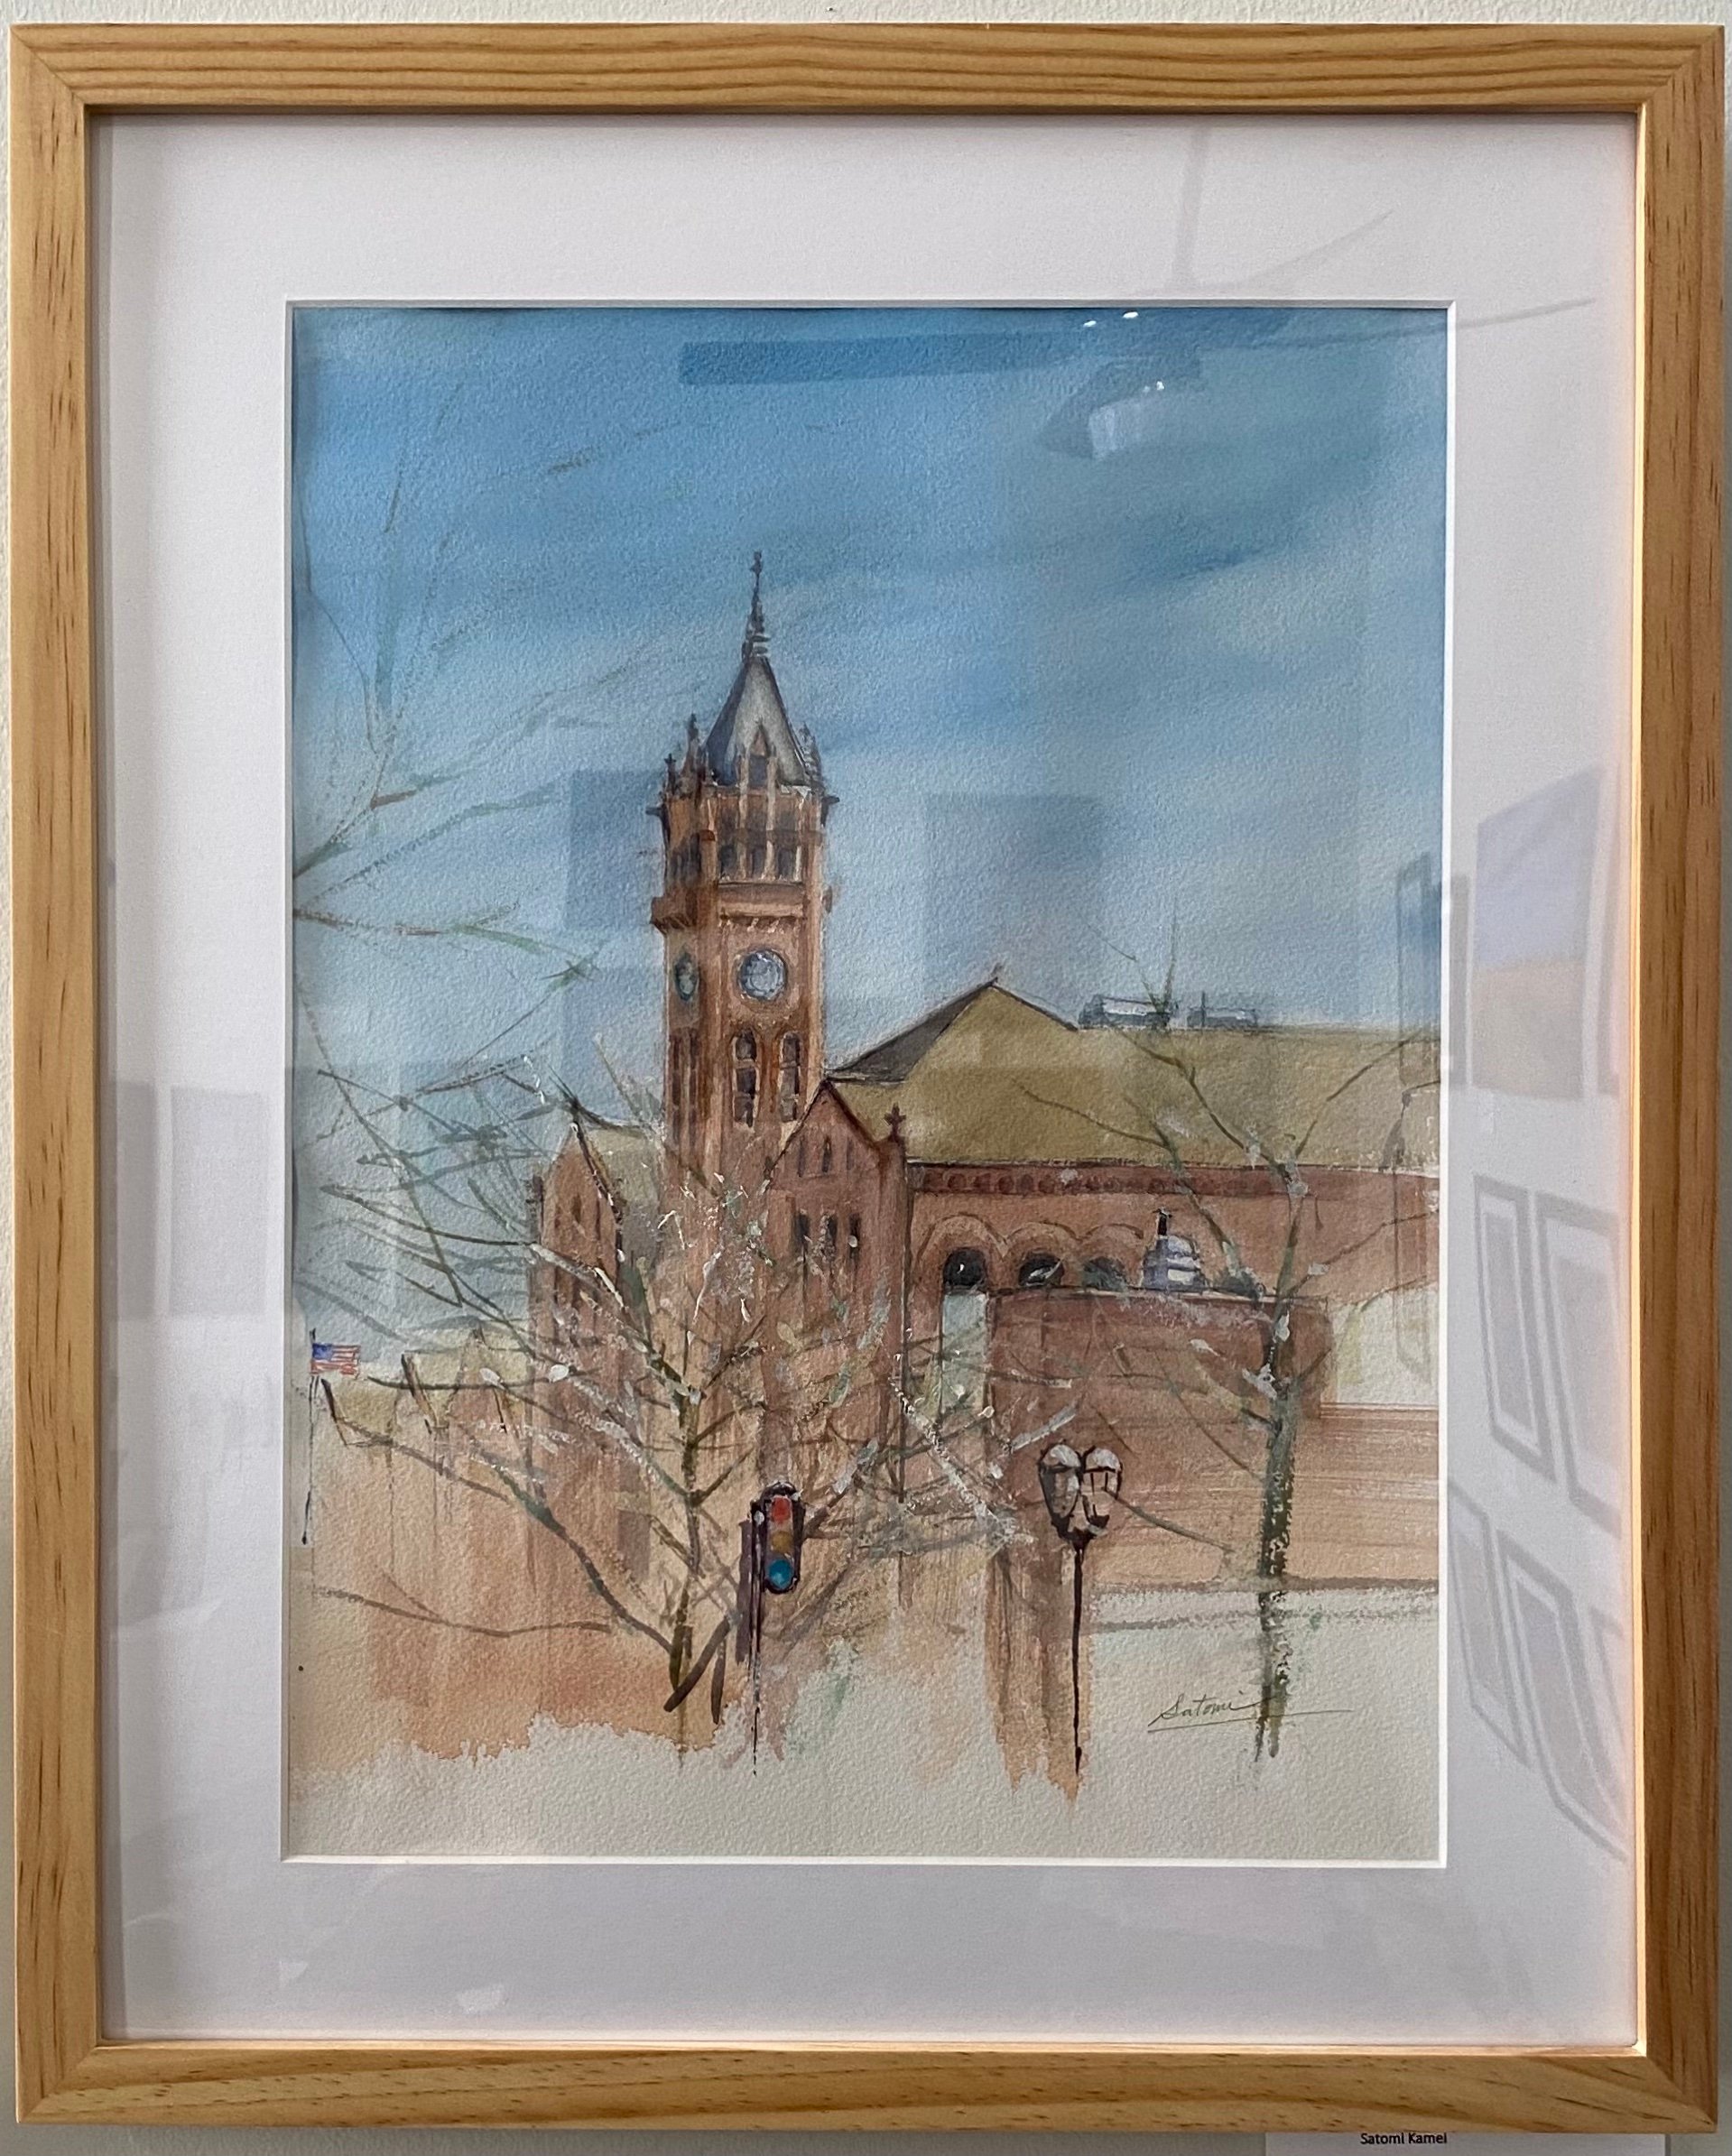 Champaign County Courthouse
Watercolor
11.5" X 16"
$250.